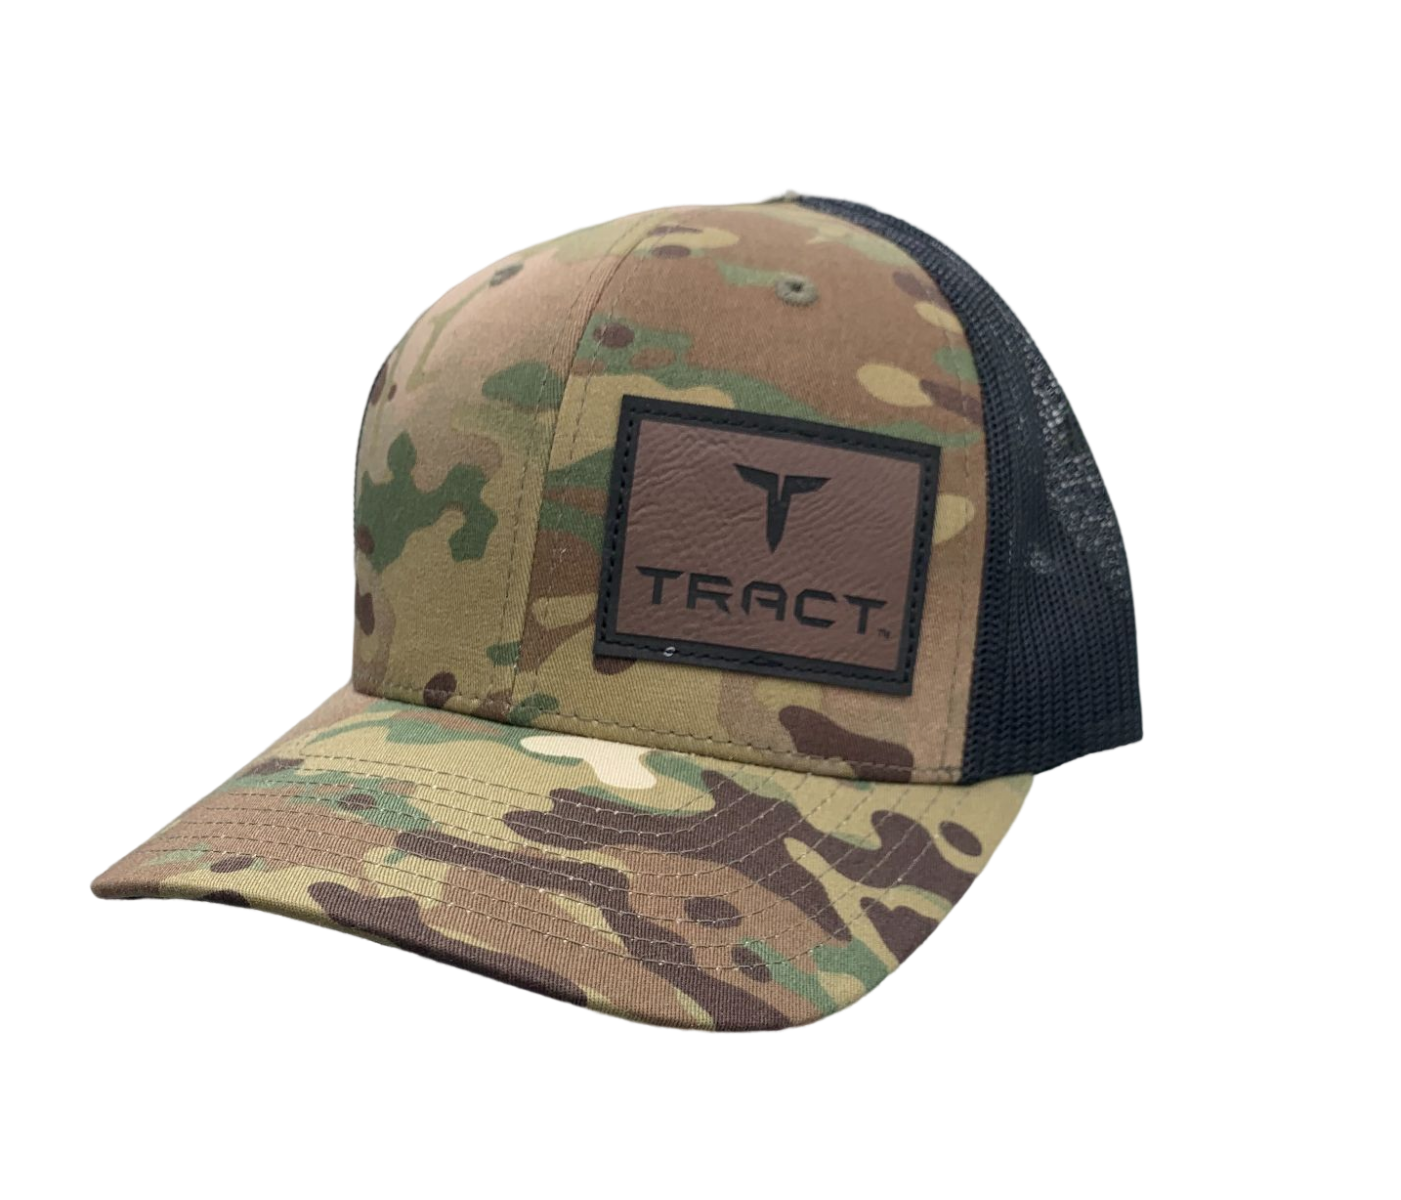 MULTICAM Snapback Cap with TRACT Patch